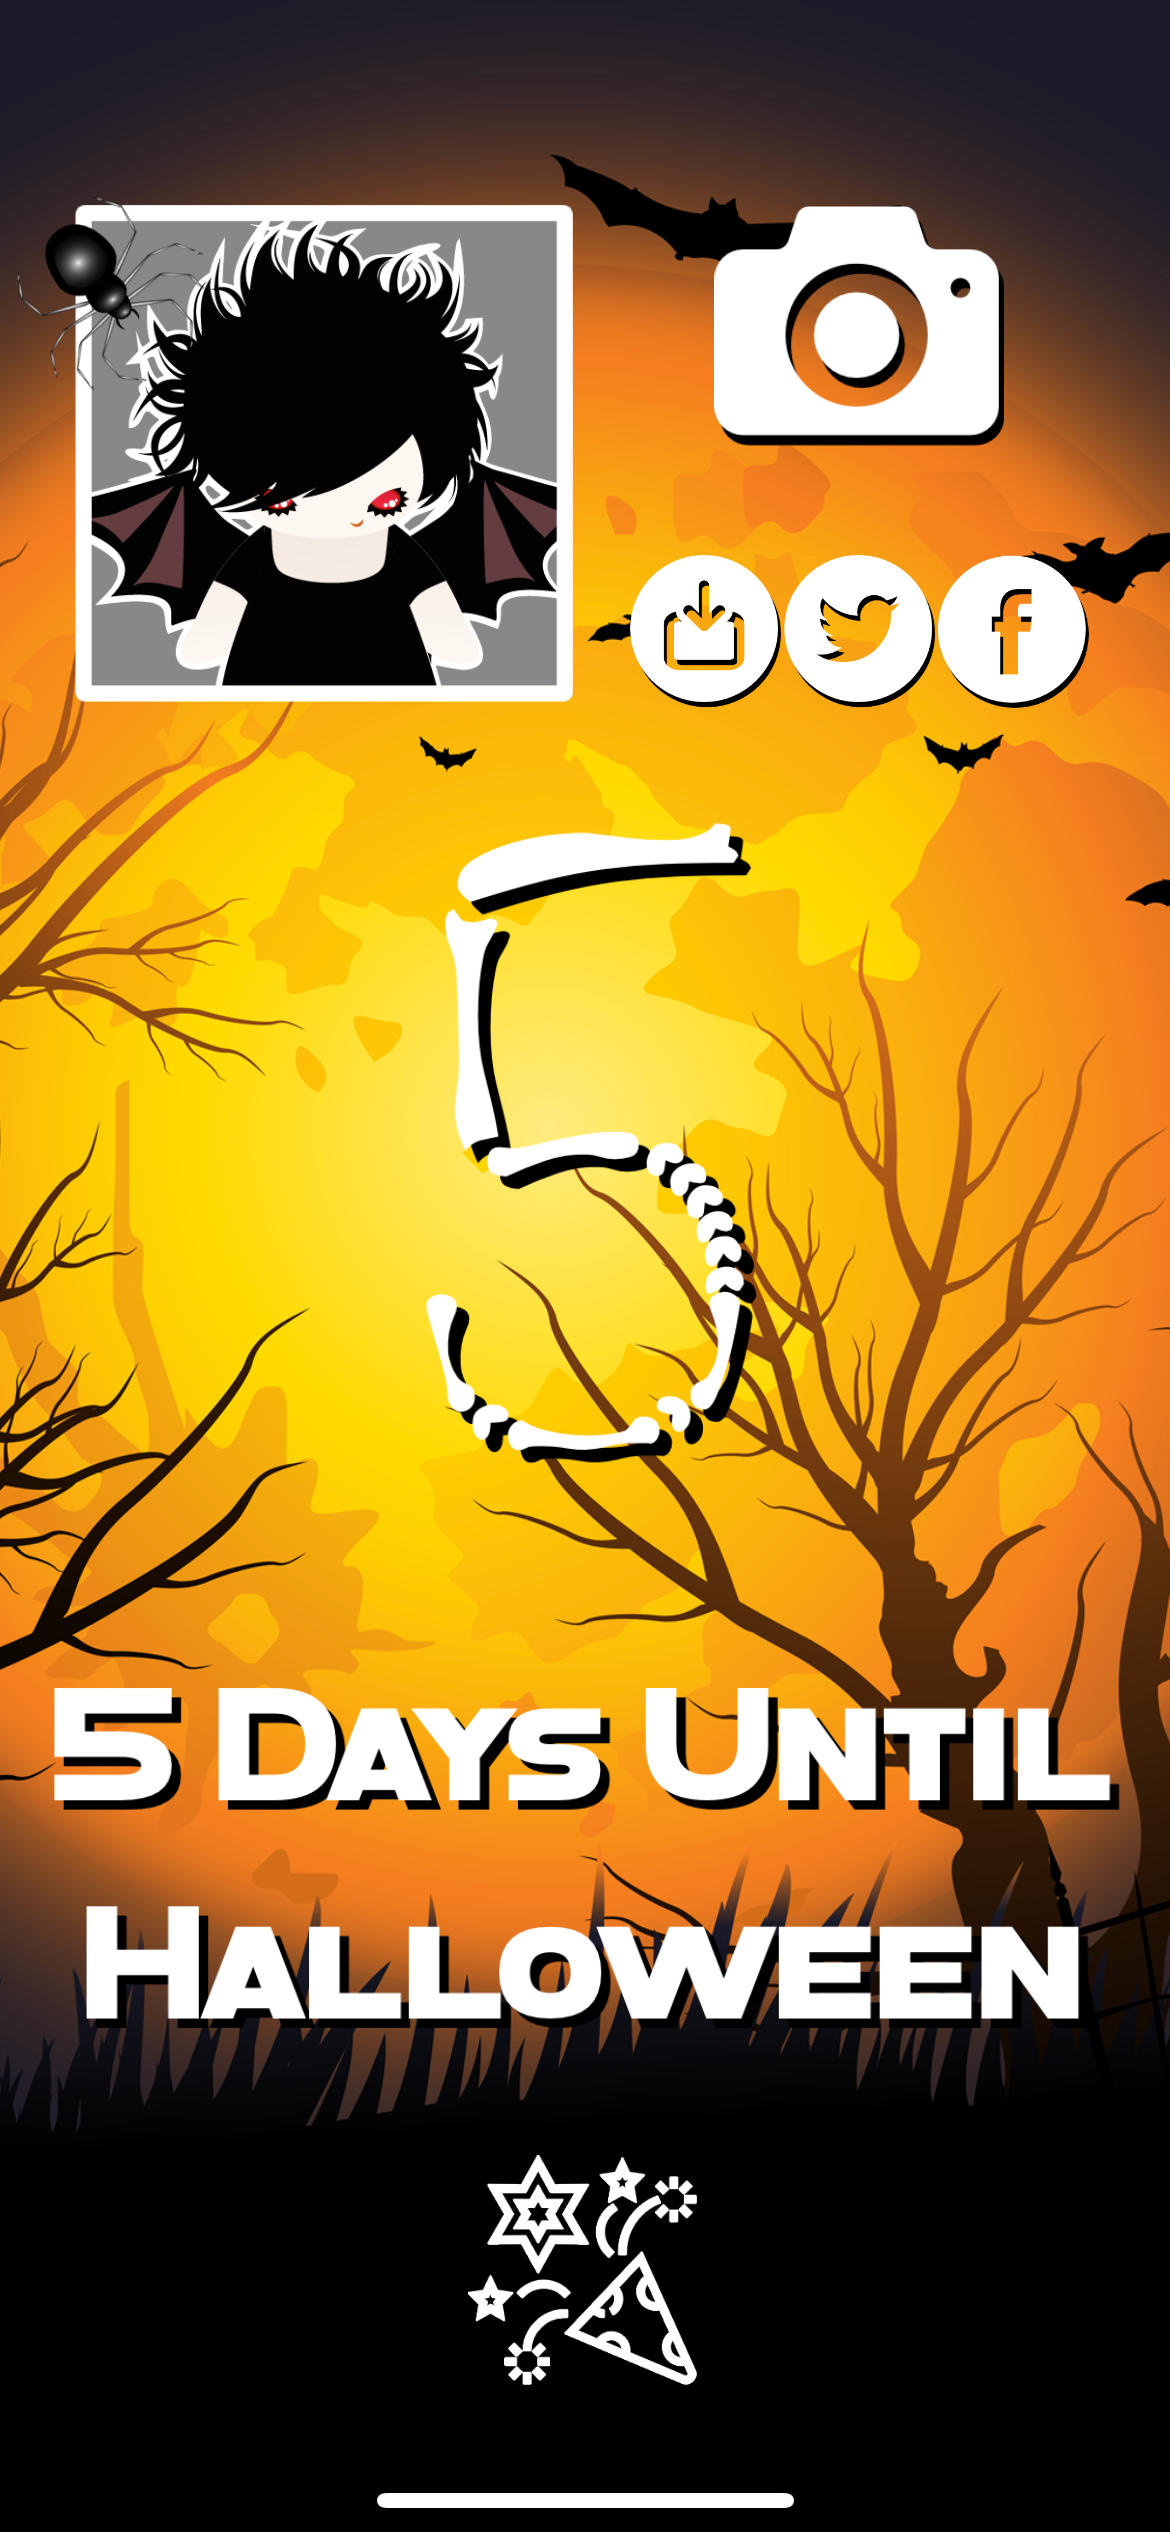 Countdown to Halloween app showing 5 days to go